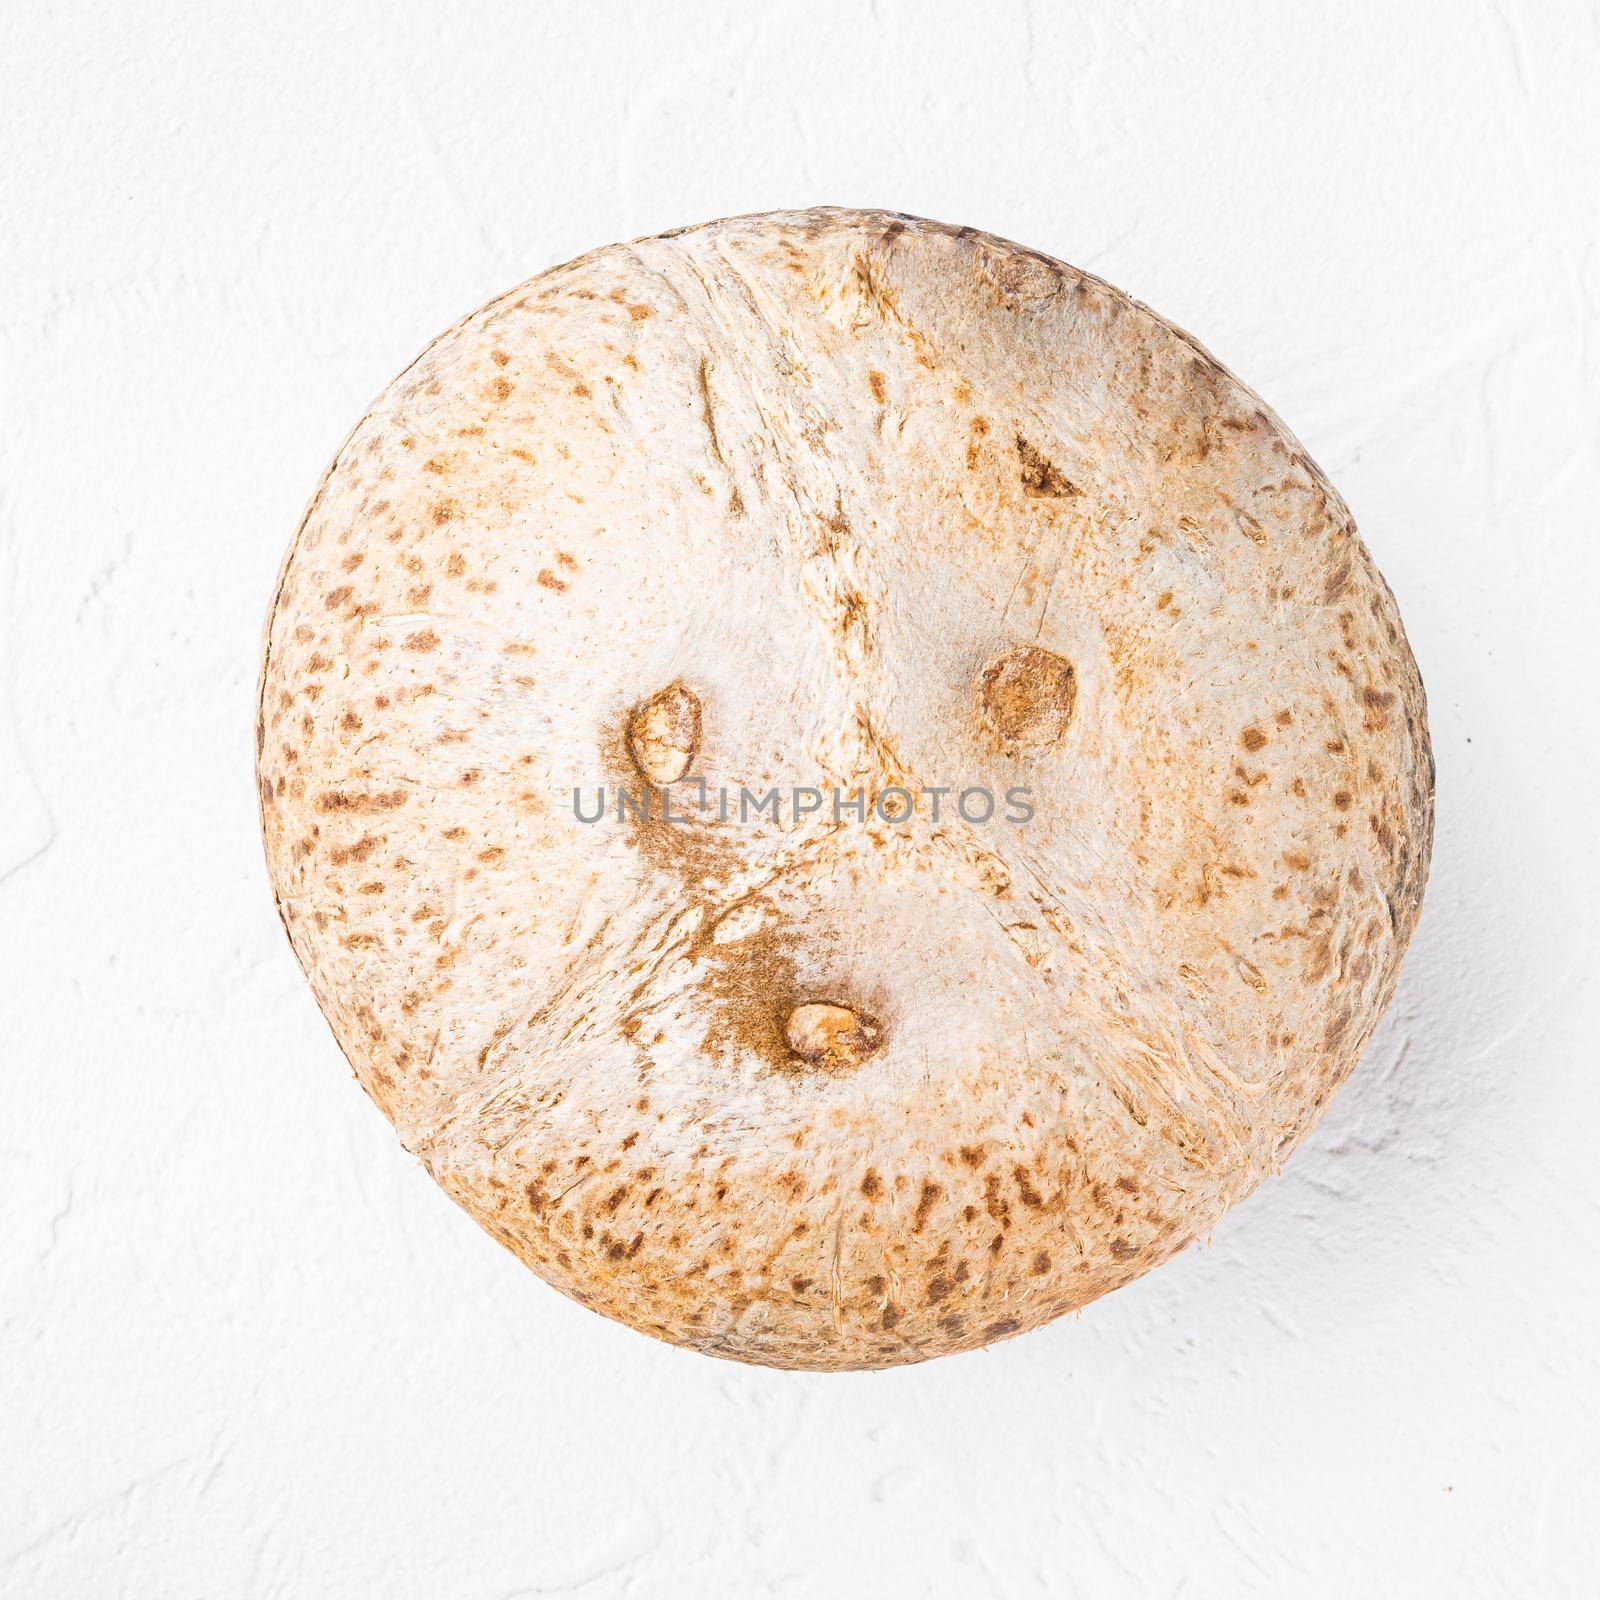 Whole ripe fresh Coconut set, on white stone table background, top view flat lay